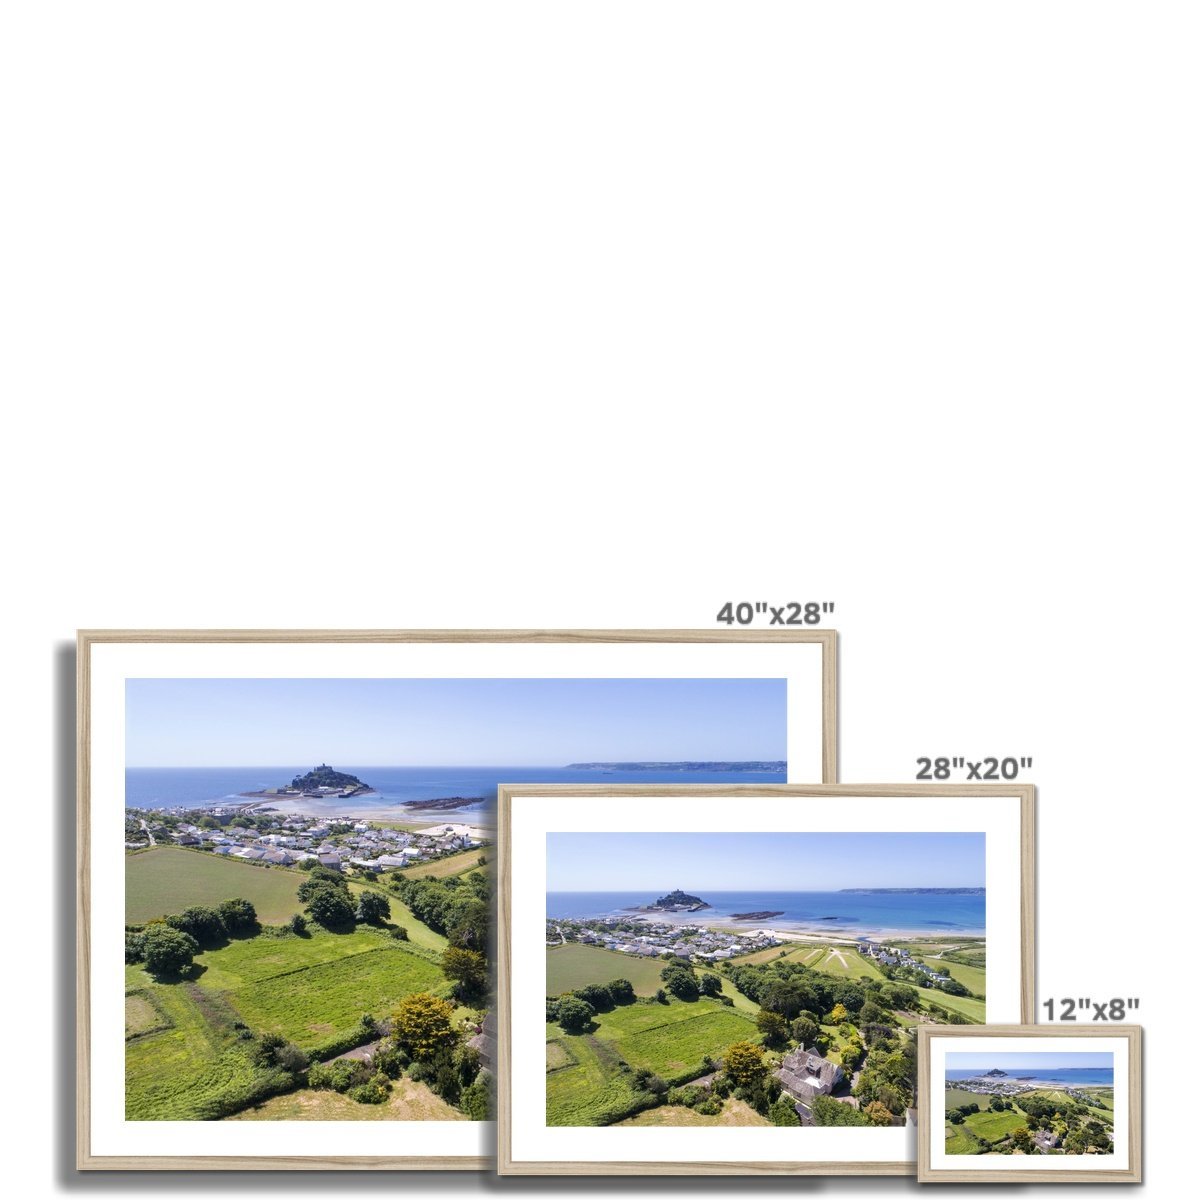 marazion to st michaels mount wooden frame sizes